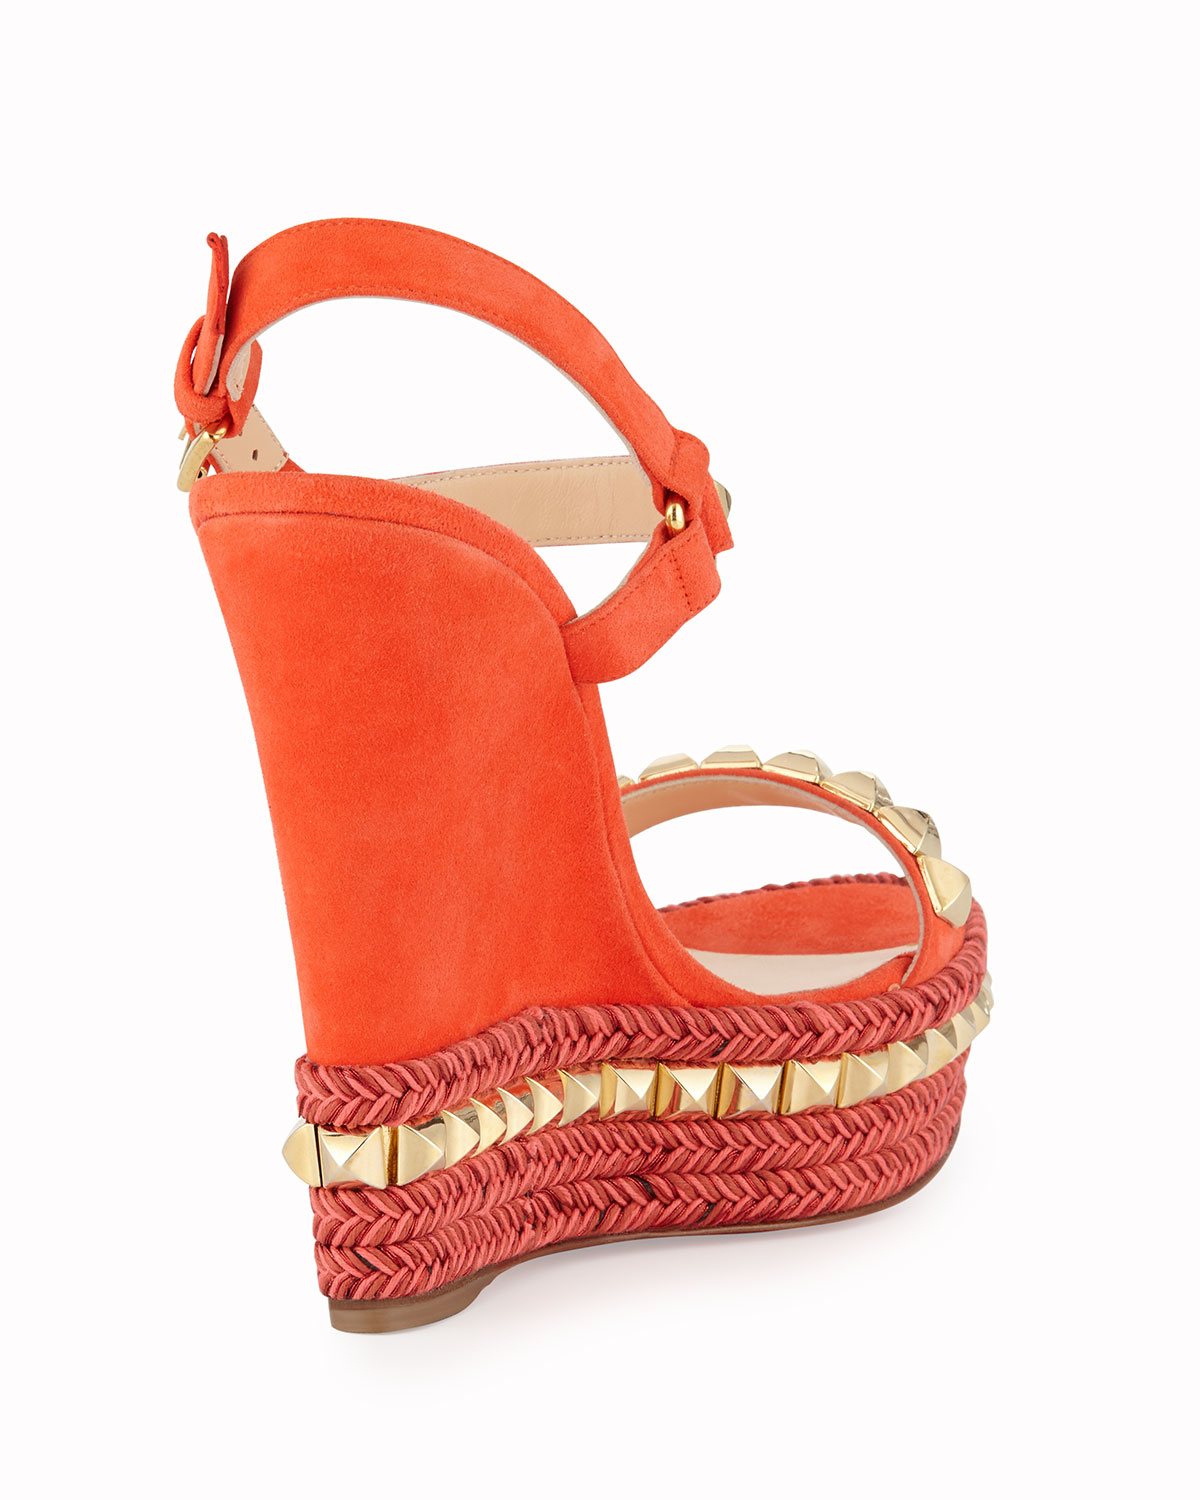 Christian louboutin Cataclou Studded Suede Red Sole Wedge Sandal ...